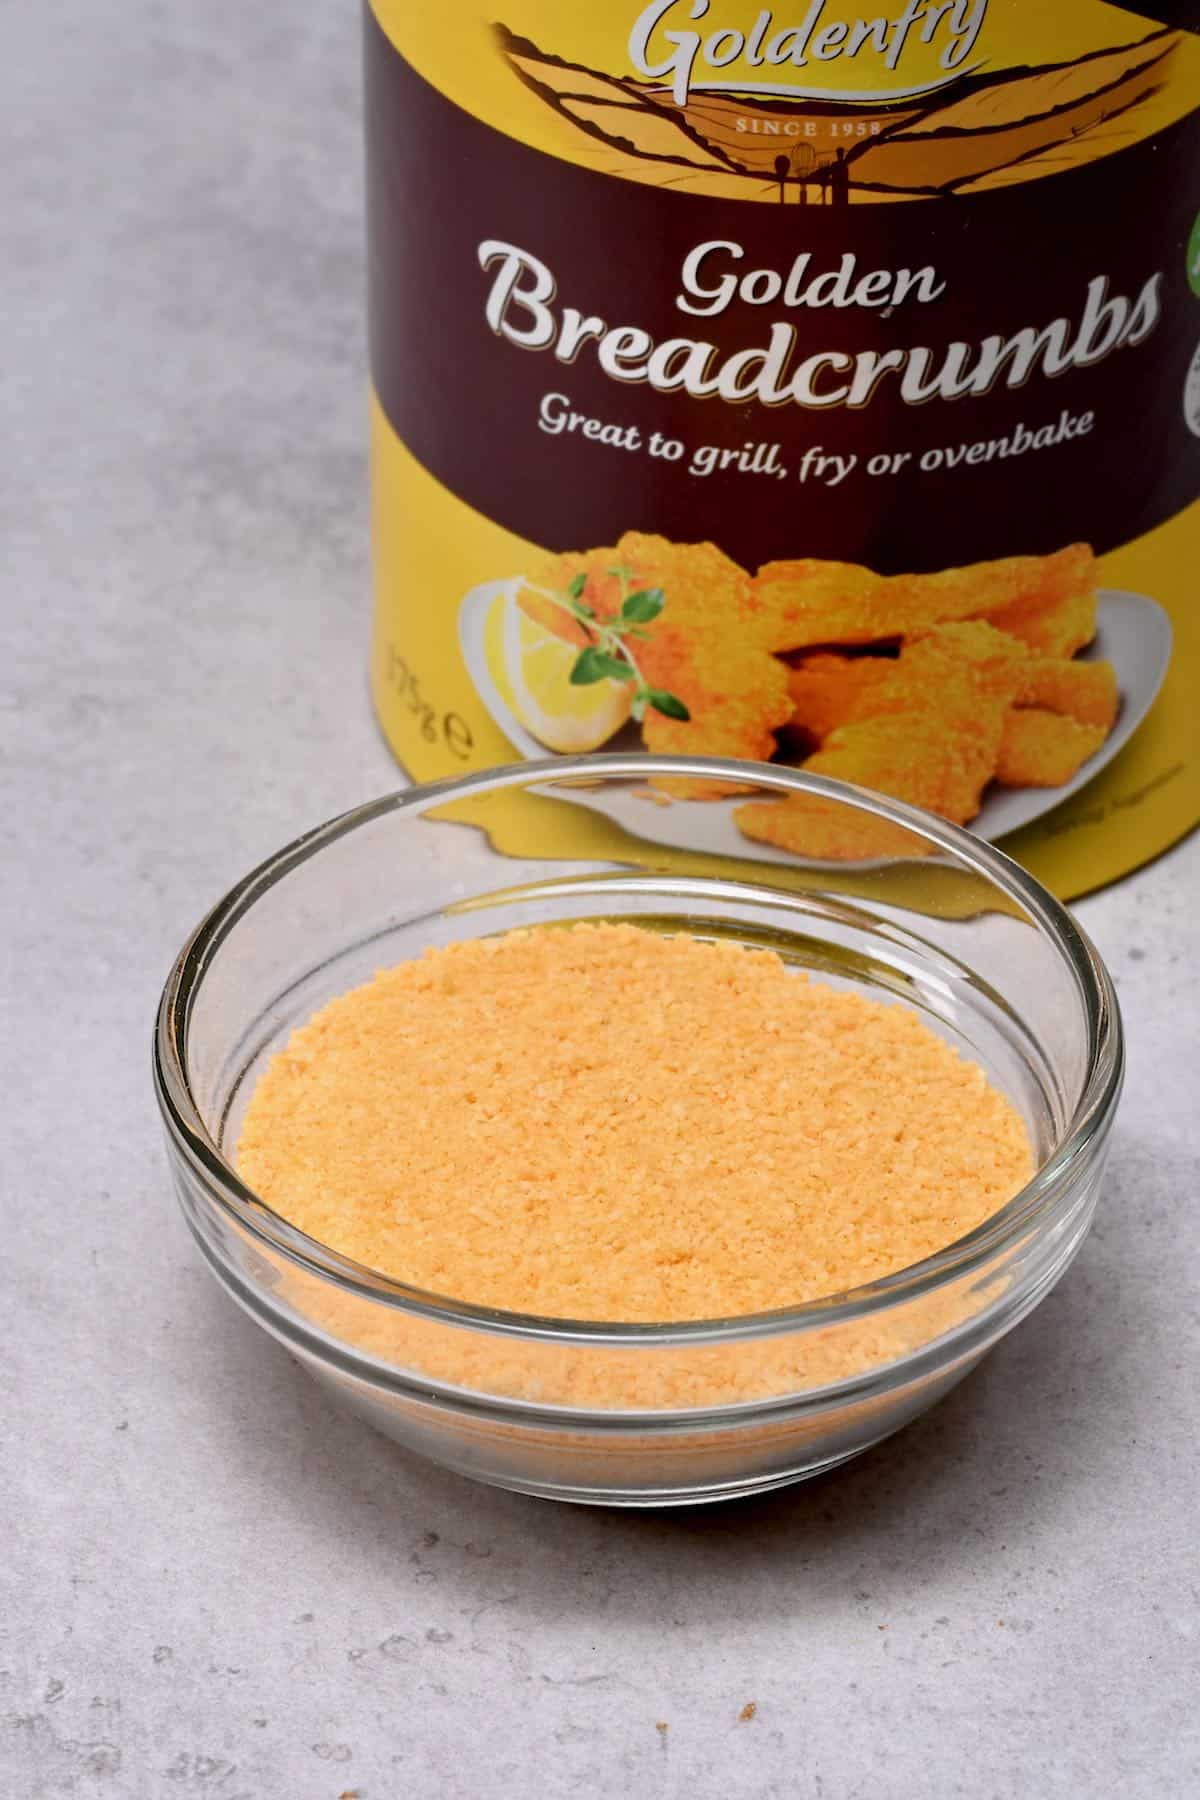 breadcrumbs in a glass bowl with breadcrumbs jar behind